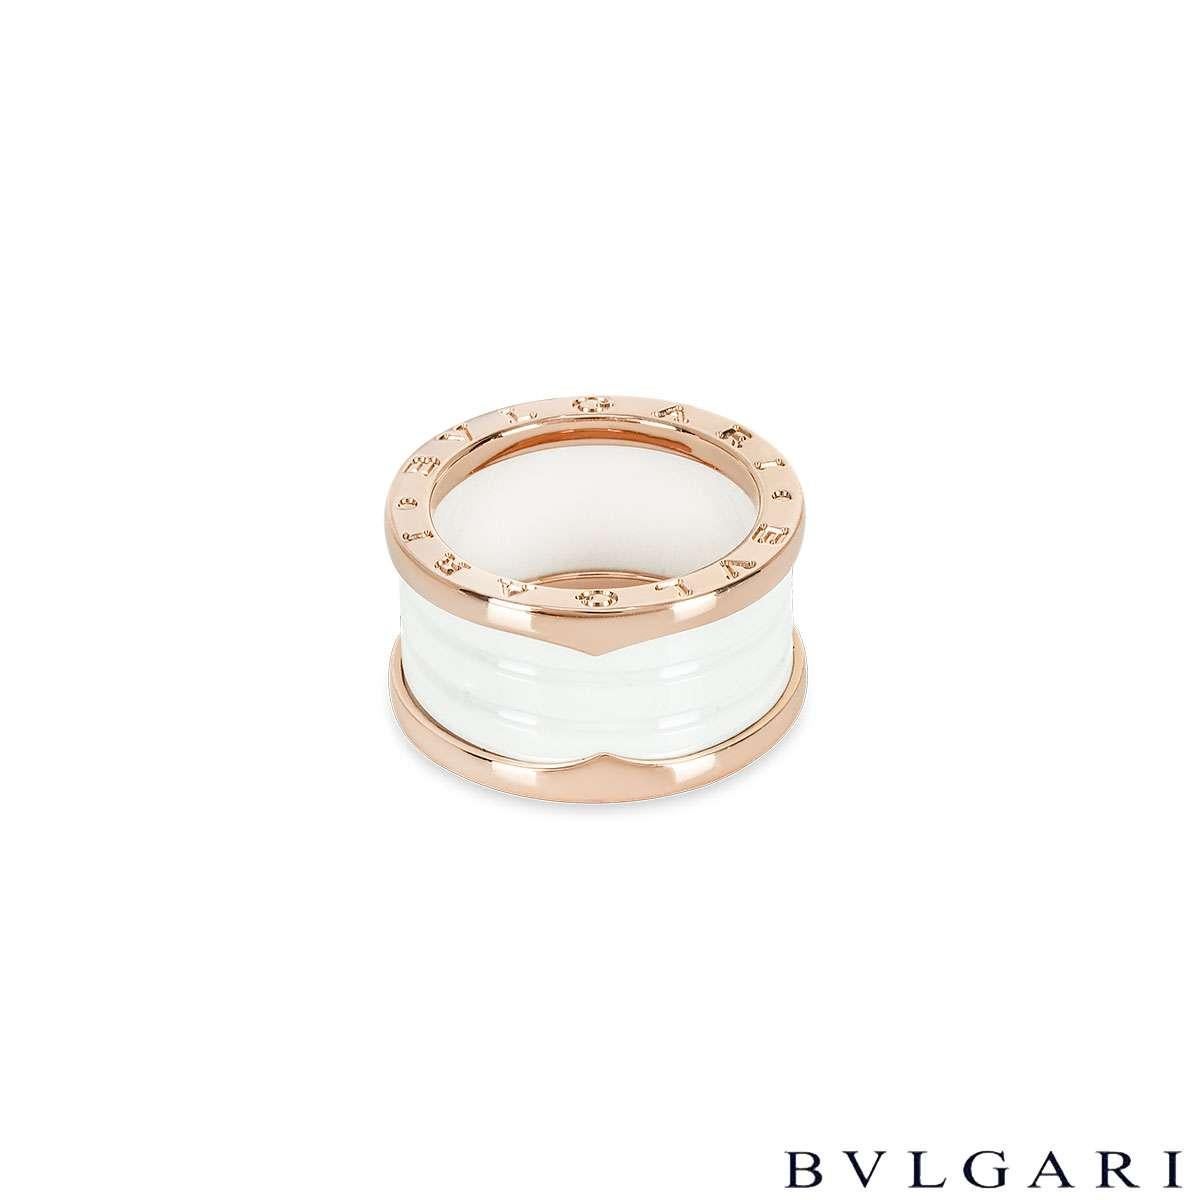 Bvlgari Rose Gold & White Ceramic B.Zero1 Size 54 Ring 345831 In Excellent Condition For Sale In London, GB